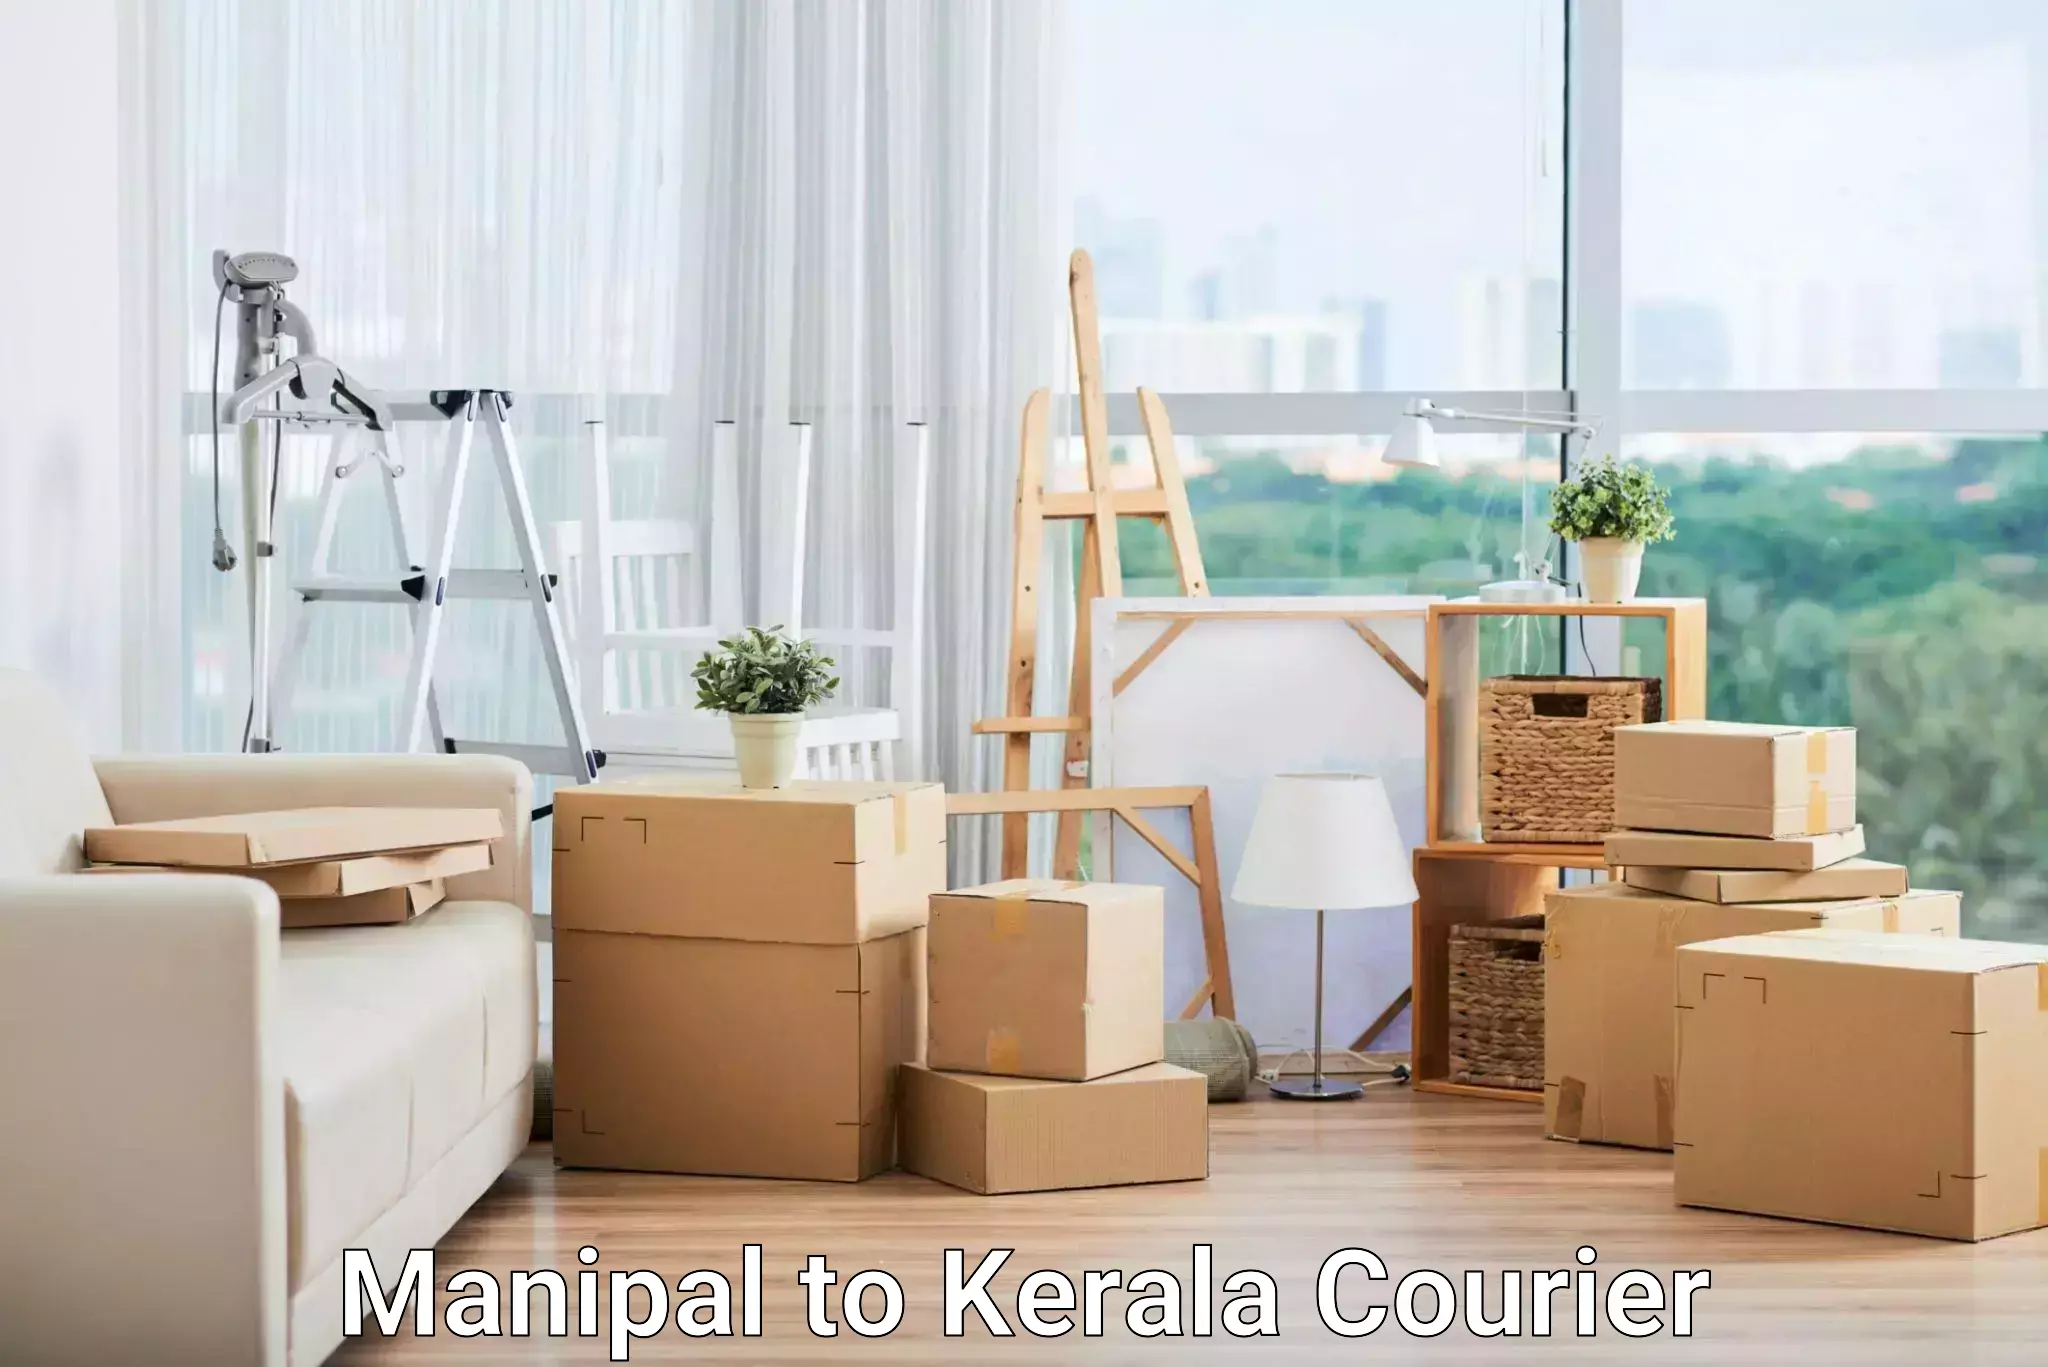 Speedy delivery service Manipal to Kerala